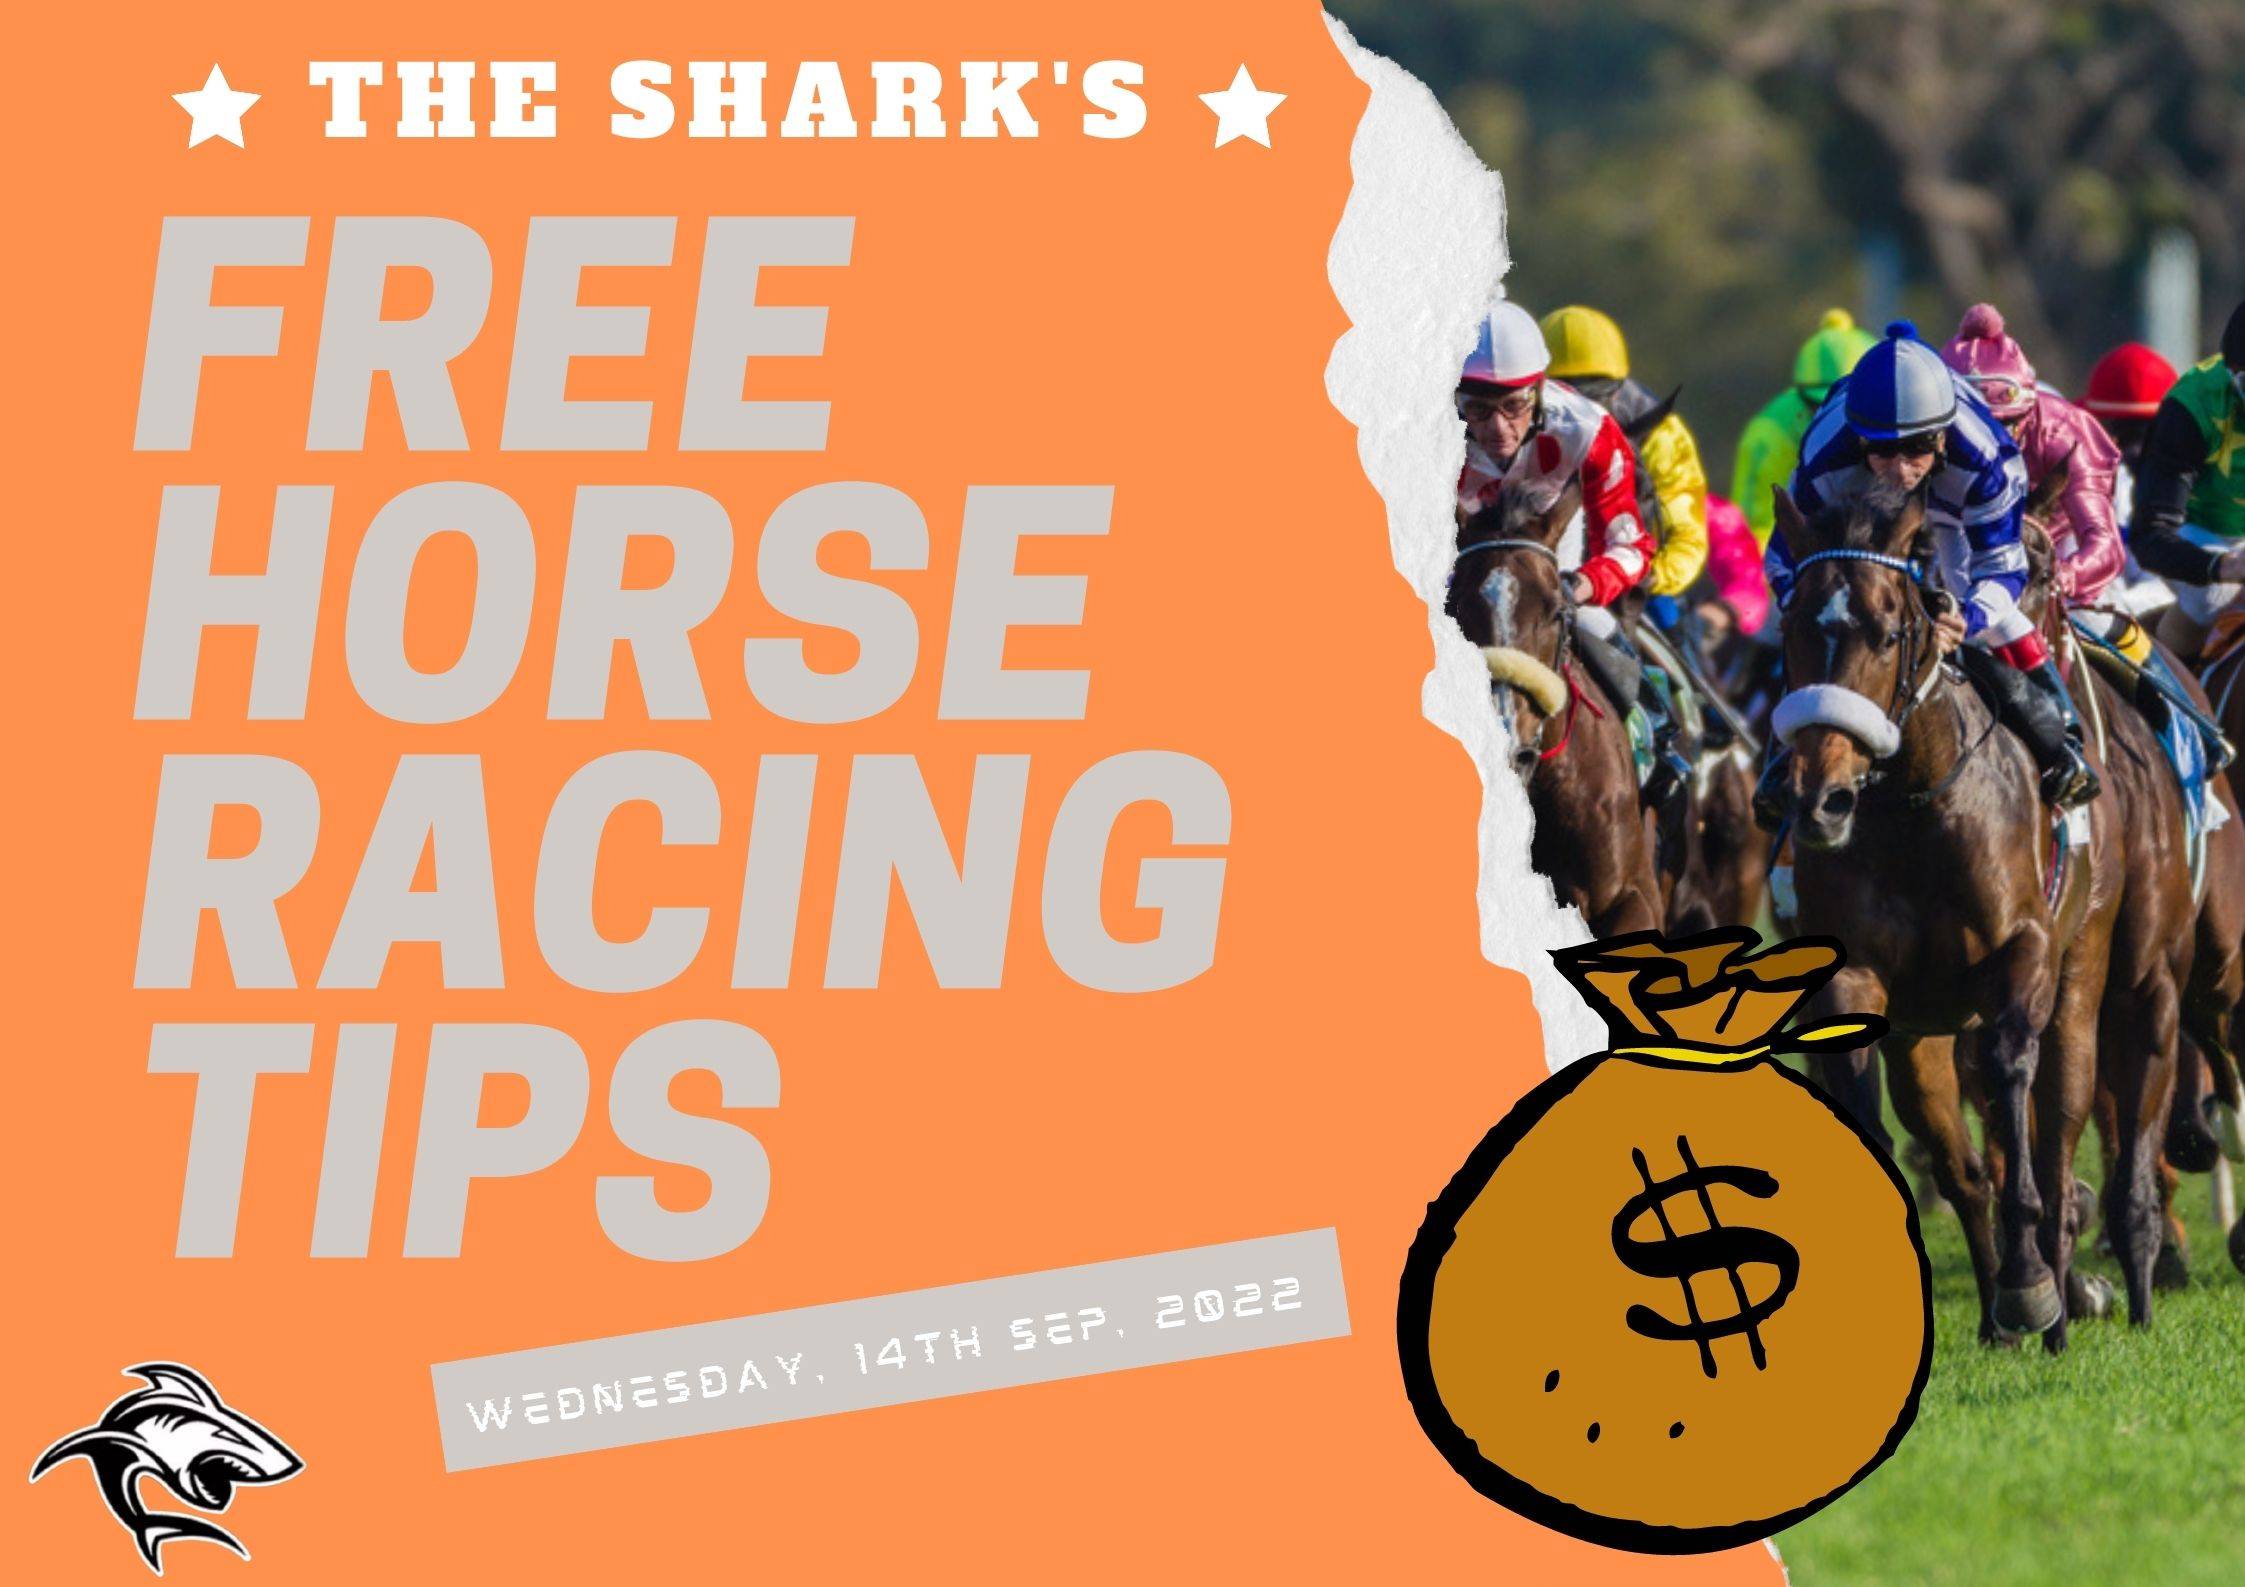 Free Horse Racing Tips - 14th Sep